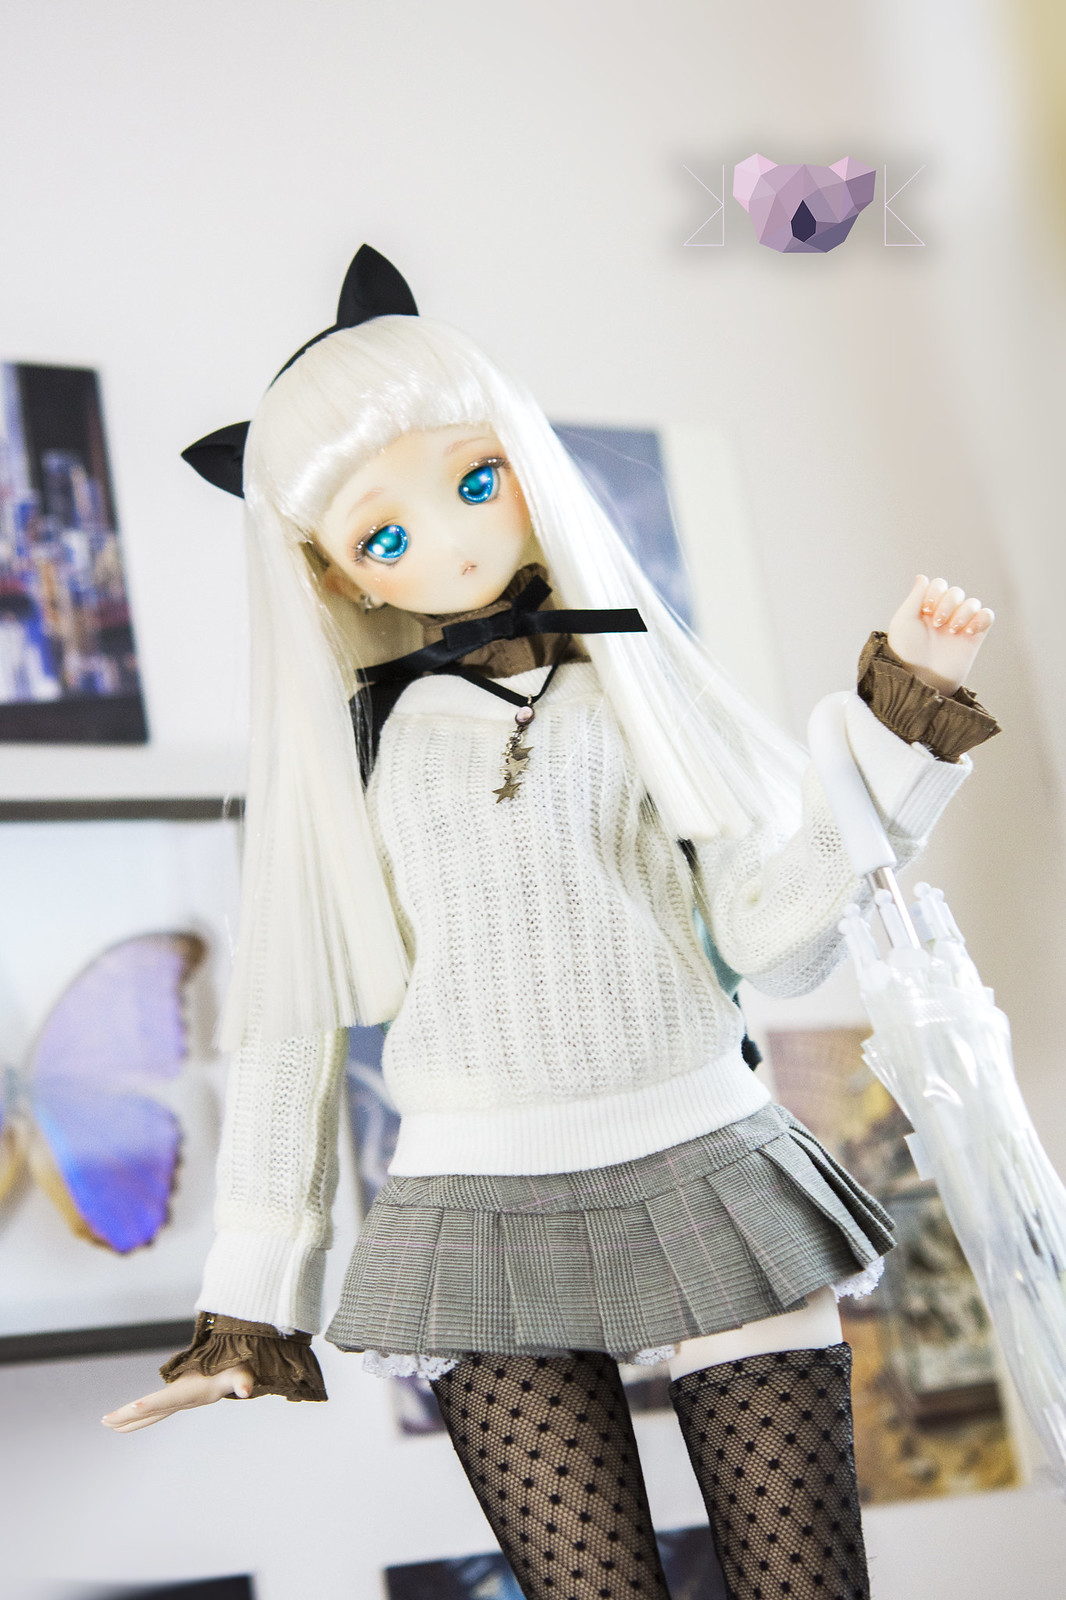 [Dollfie Icon / Dollfie Dream]   ✧* ✧*  Cooking time !  // The Fox Knight  *✧ *✧ - Page 24 50831255502_cddfec25e8_h